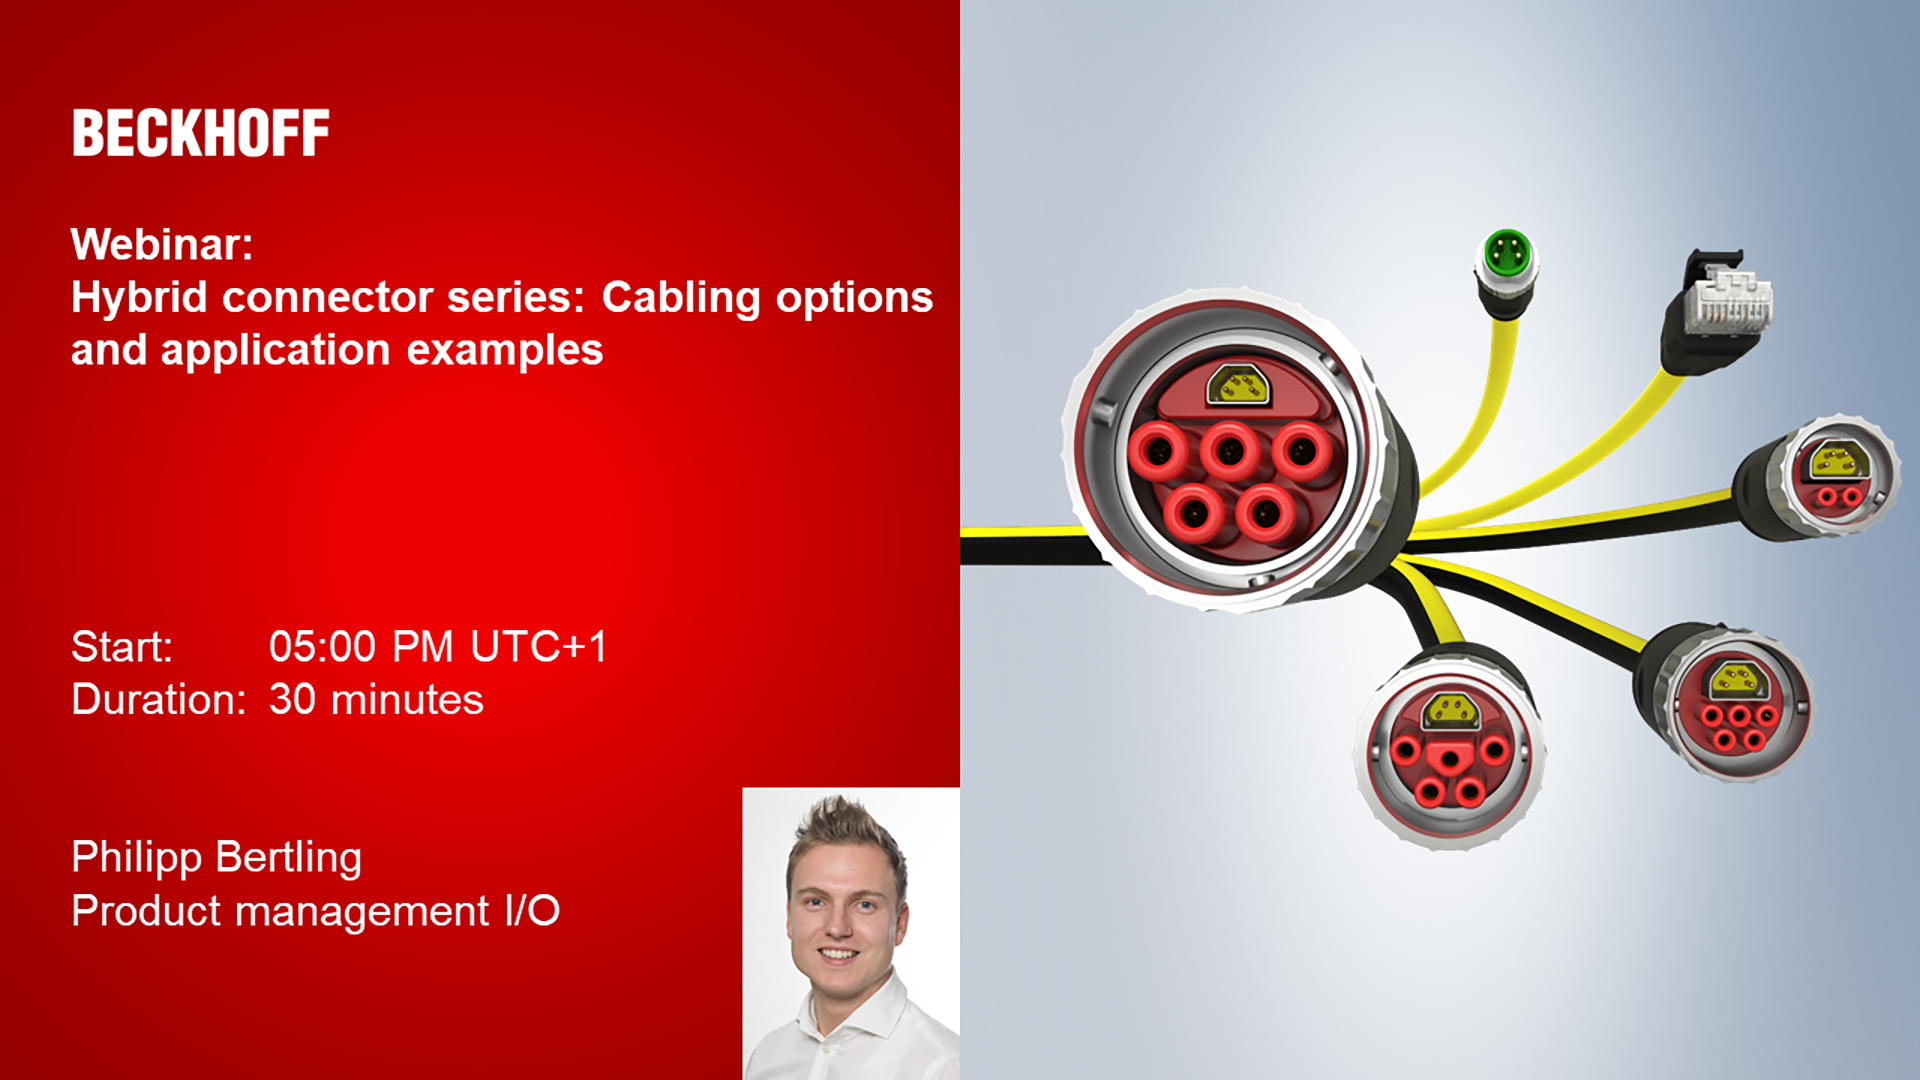 Hybrid connector series: Cabling options and application examples